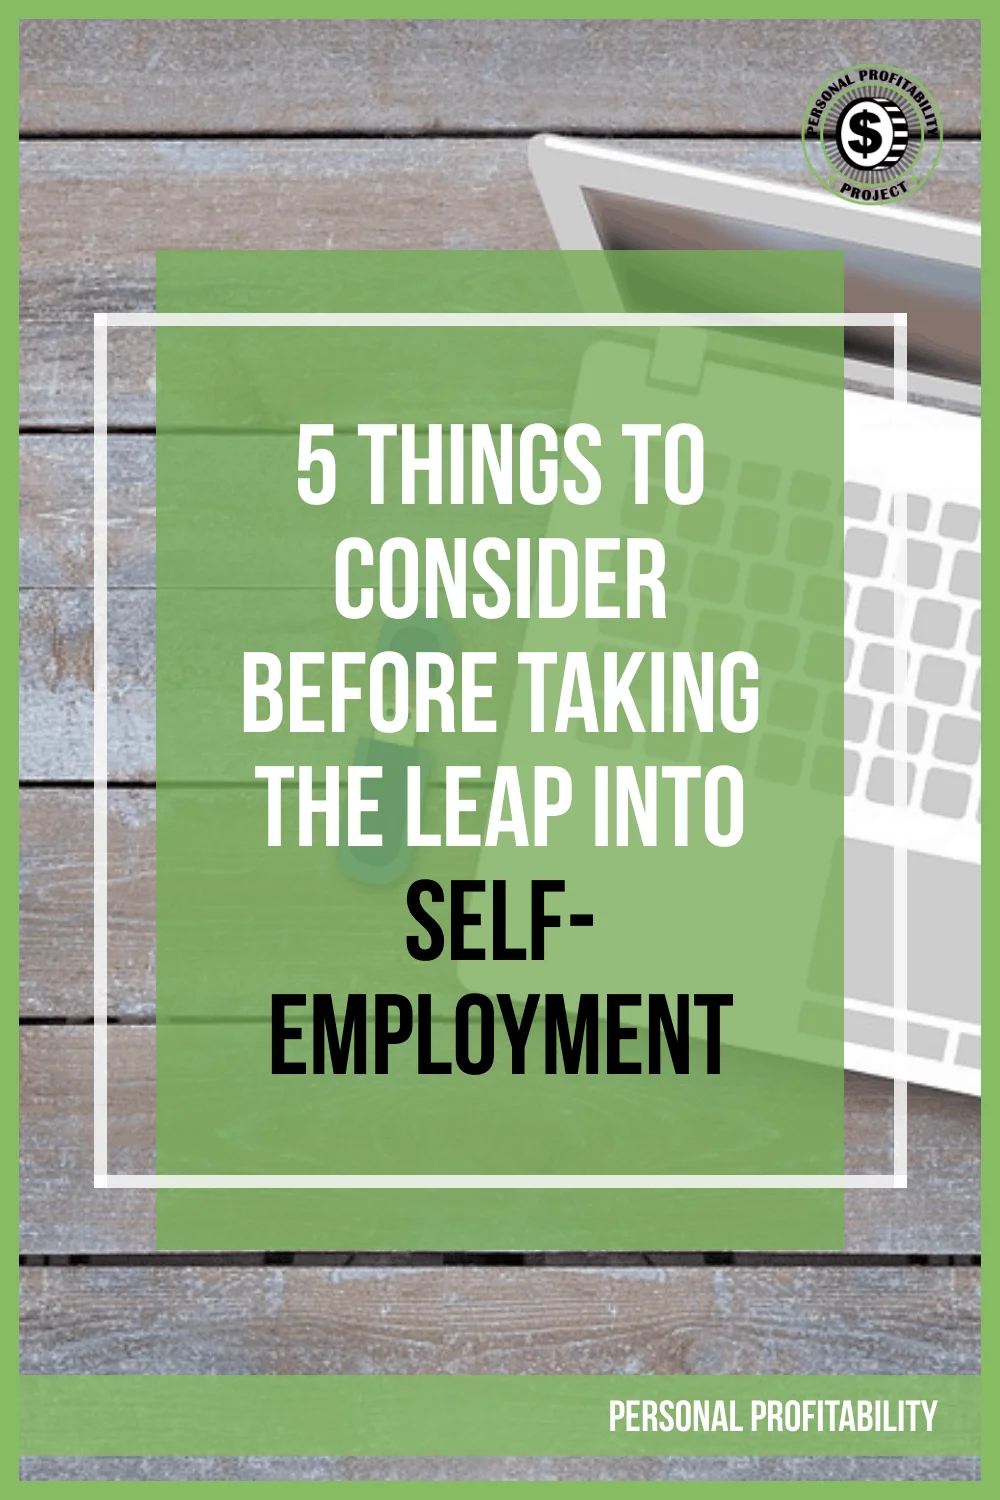 5 Things to Consider Before Taking the Leap into Self-Employment